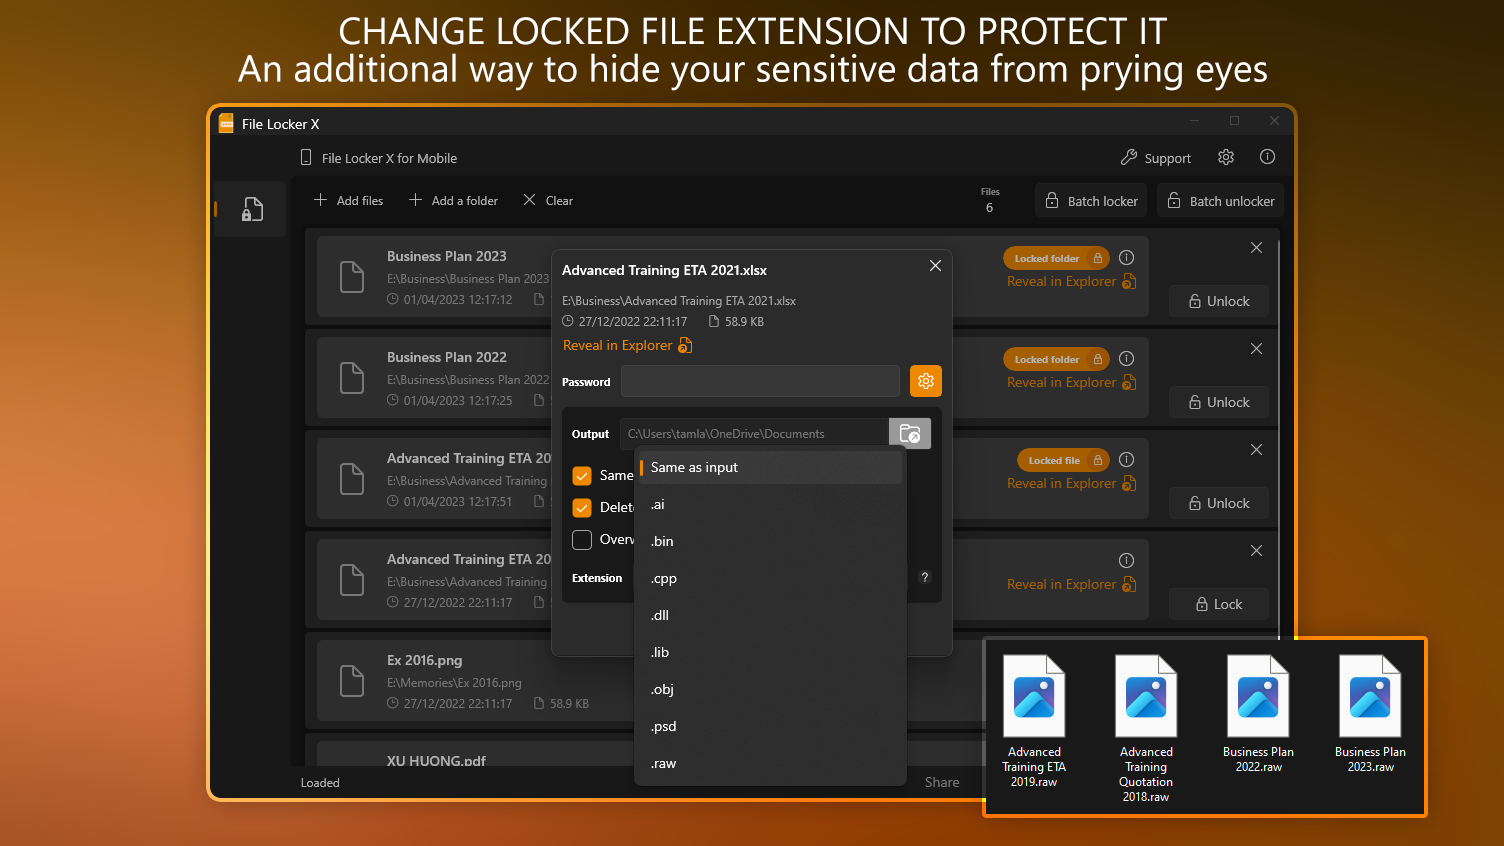 Change Locked File Extension to Protect It - An additional way to hide your sensitive data from prying eyes